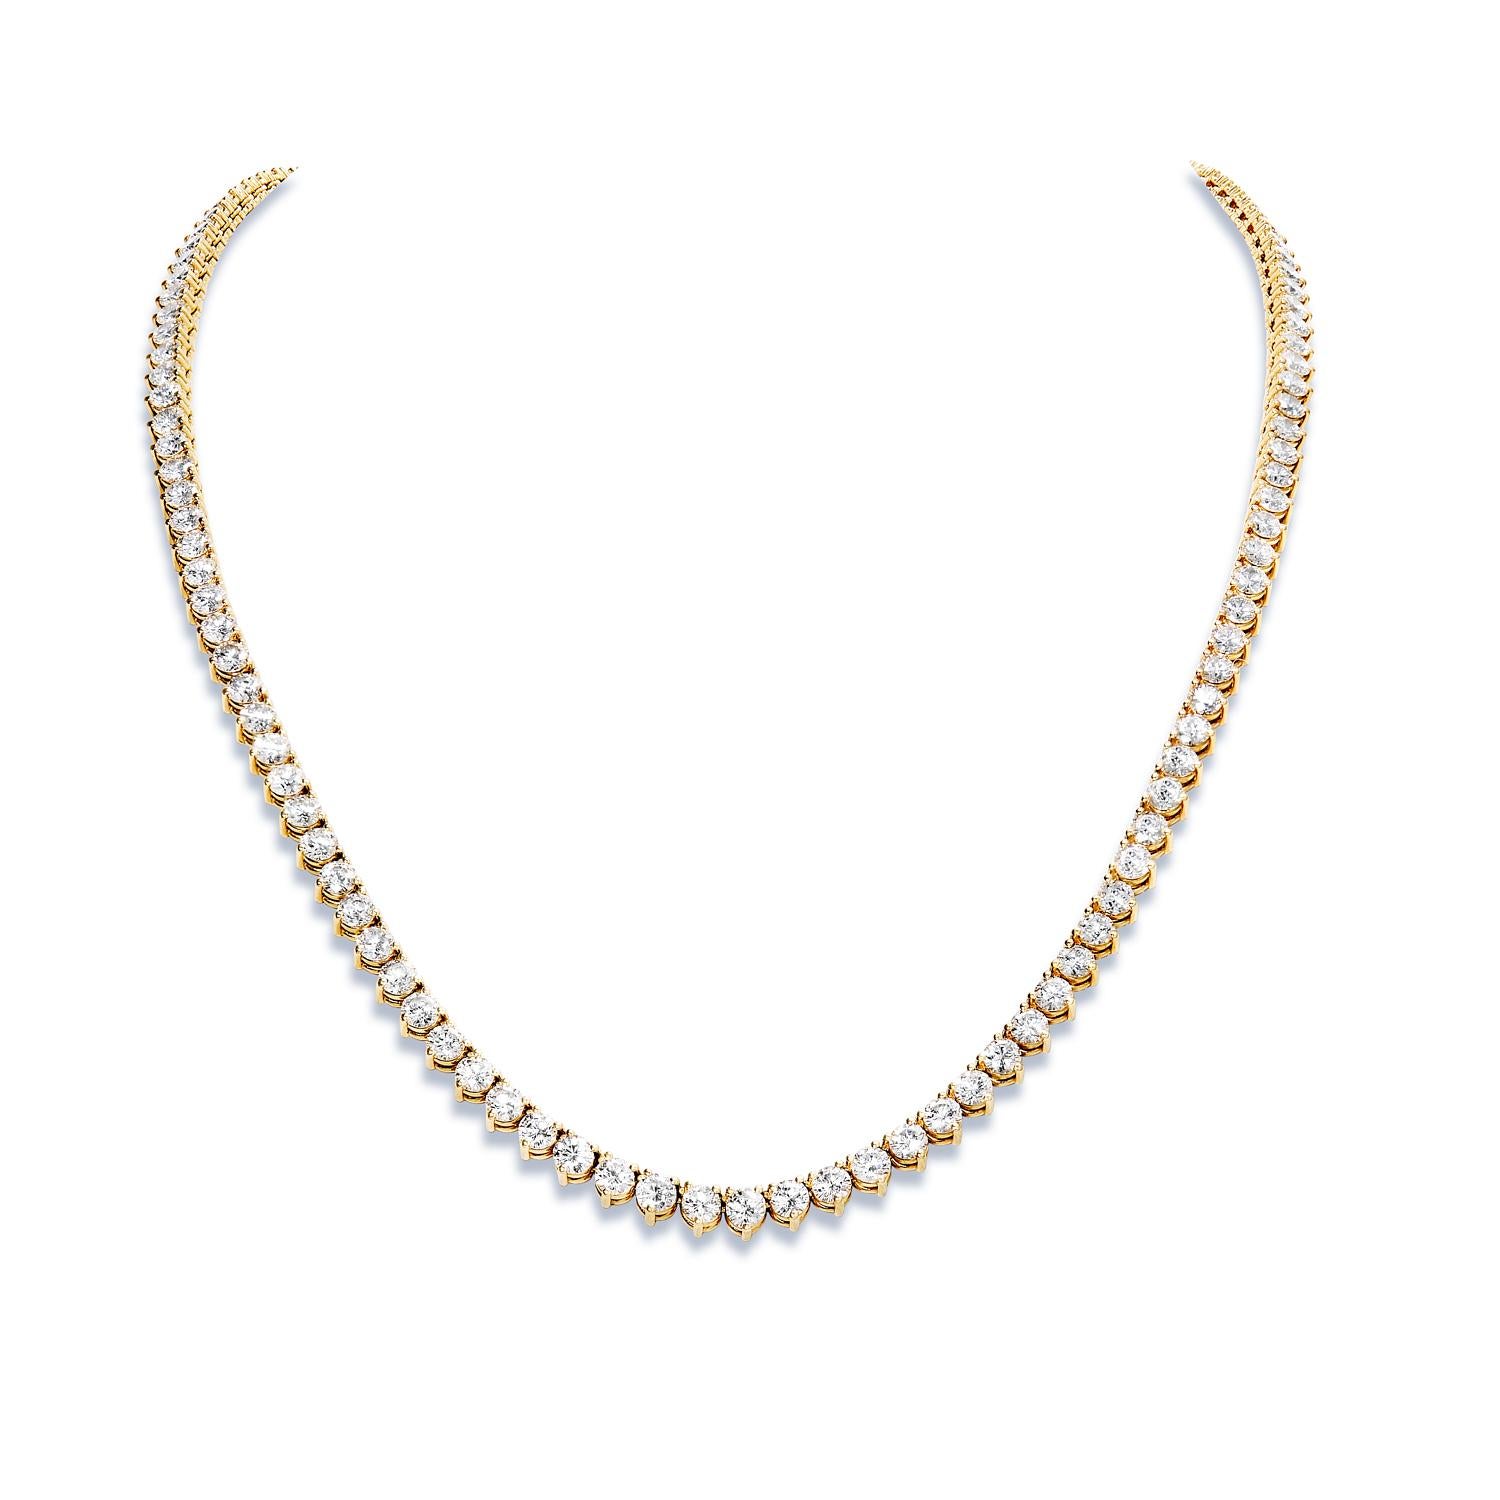 For Unisex

Earth Mined Diamond:
Carat Weight: 33.50 Carats
Style: Round Brilliant Cut
Setting: 3 Prong
Chains: 14 Karat Yellow Gold 49.40 grams
Number of Diamonds: 128

Opera Necklace, long diamond necklace

23  inches long